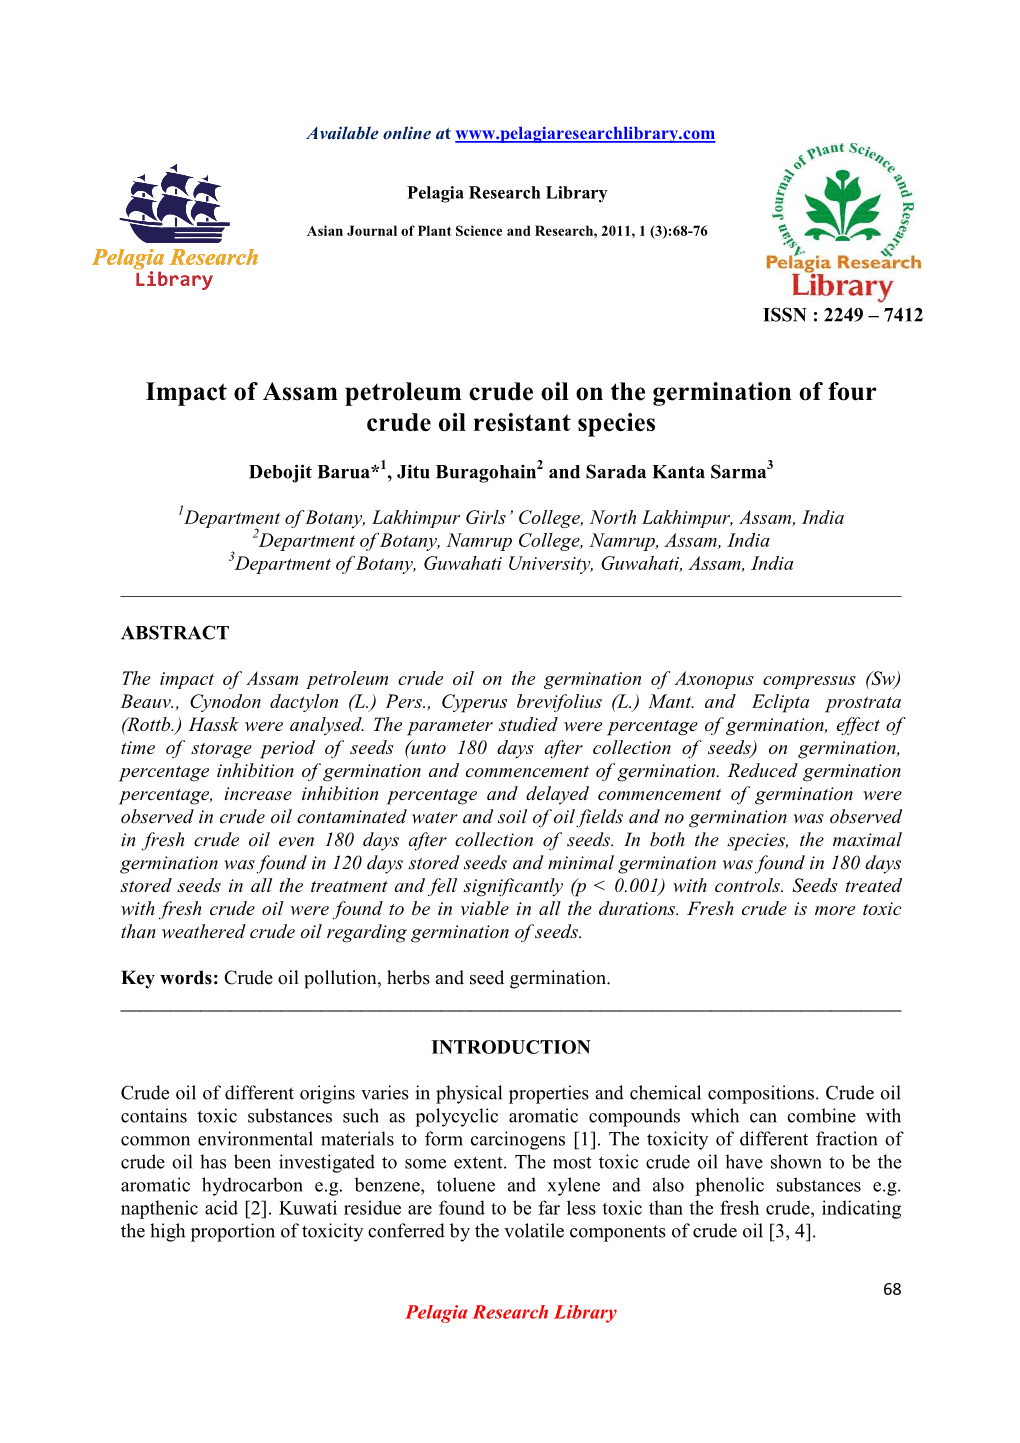 Impact of Assam Petroleum Crude Oil on the Germination of Four Crude Oil Resistant Species